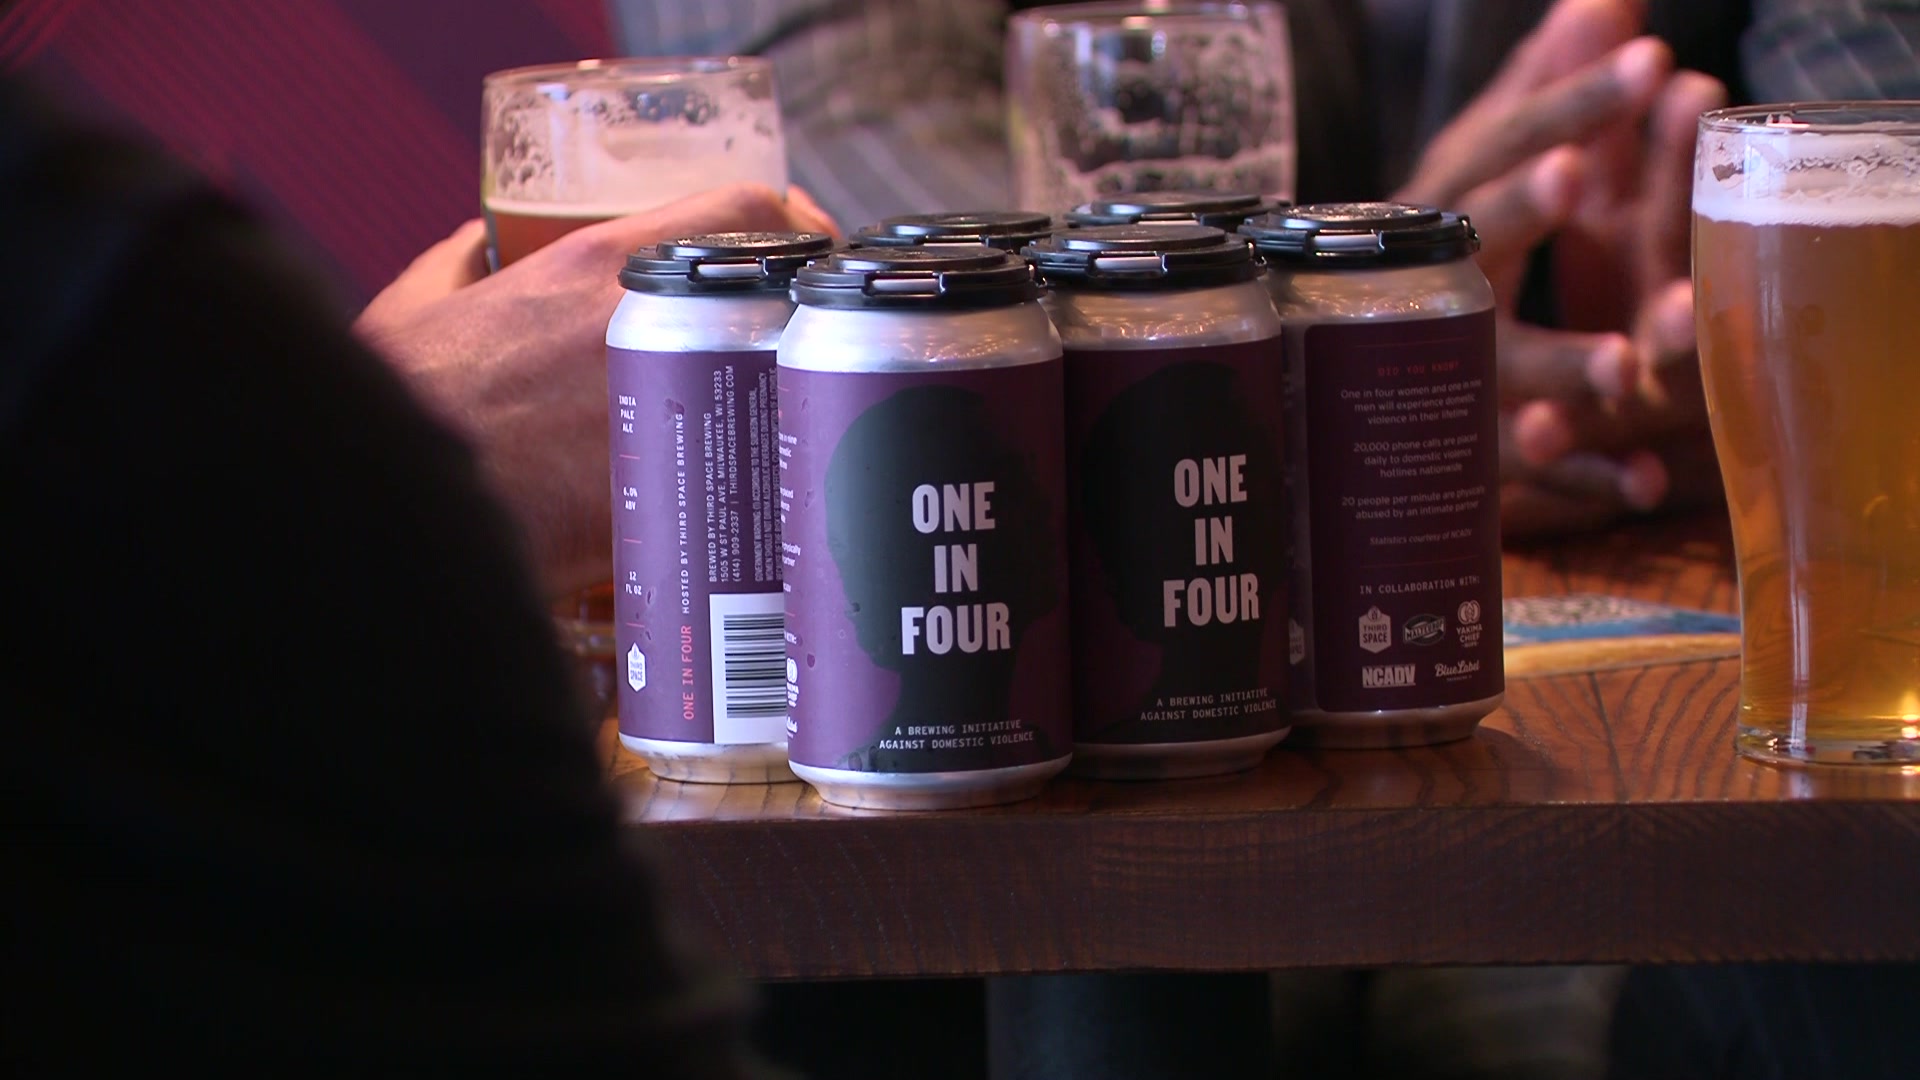 One in Four: New Third Space IPA raising money and attention for domestic violence